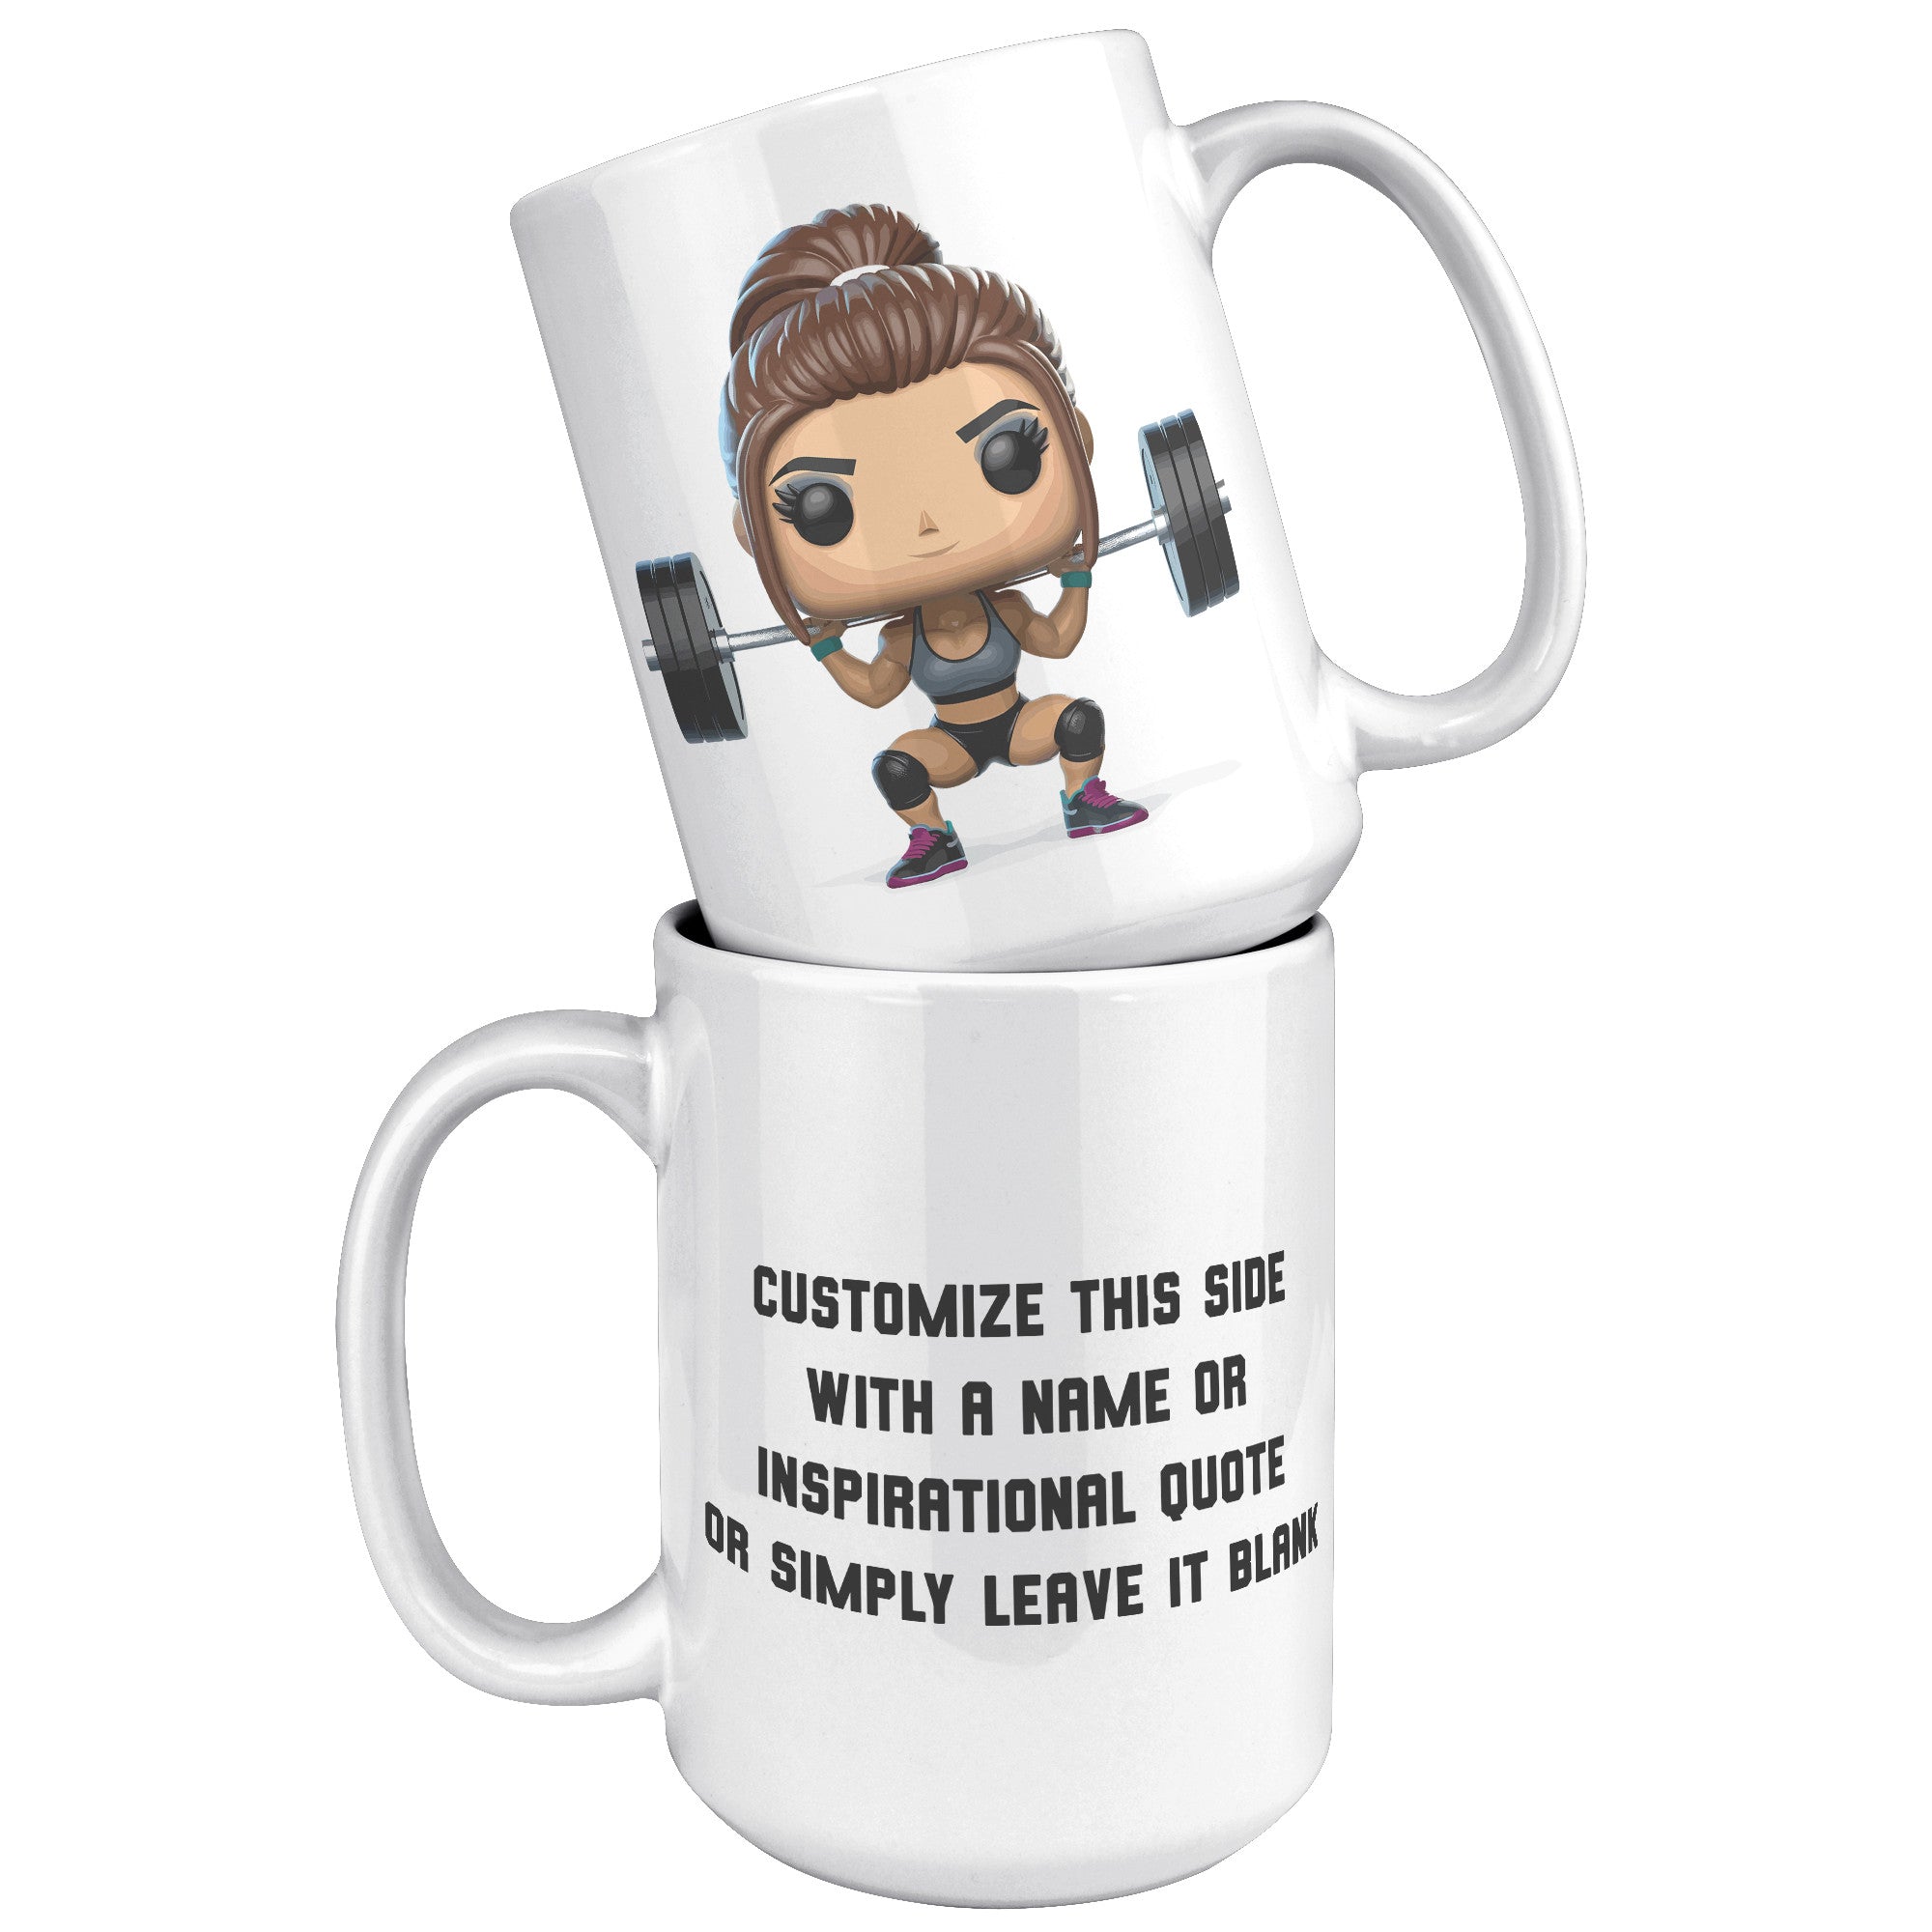 "CrossFit Funko Pop Style Mug - Male Fitness Enthusiast Coffee Cup - Unique Gift for Gym Buffs - Fun Workout-Inspired Drinkware" - D1